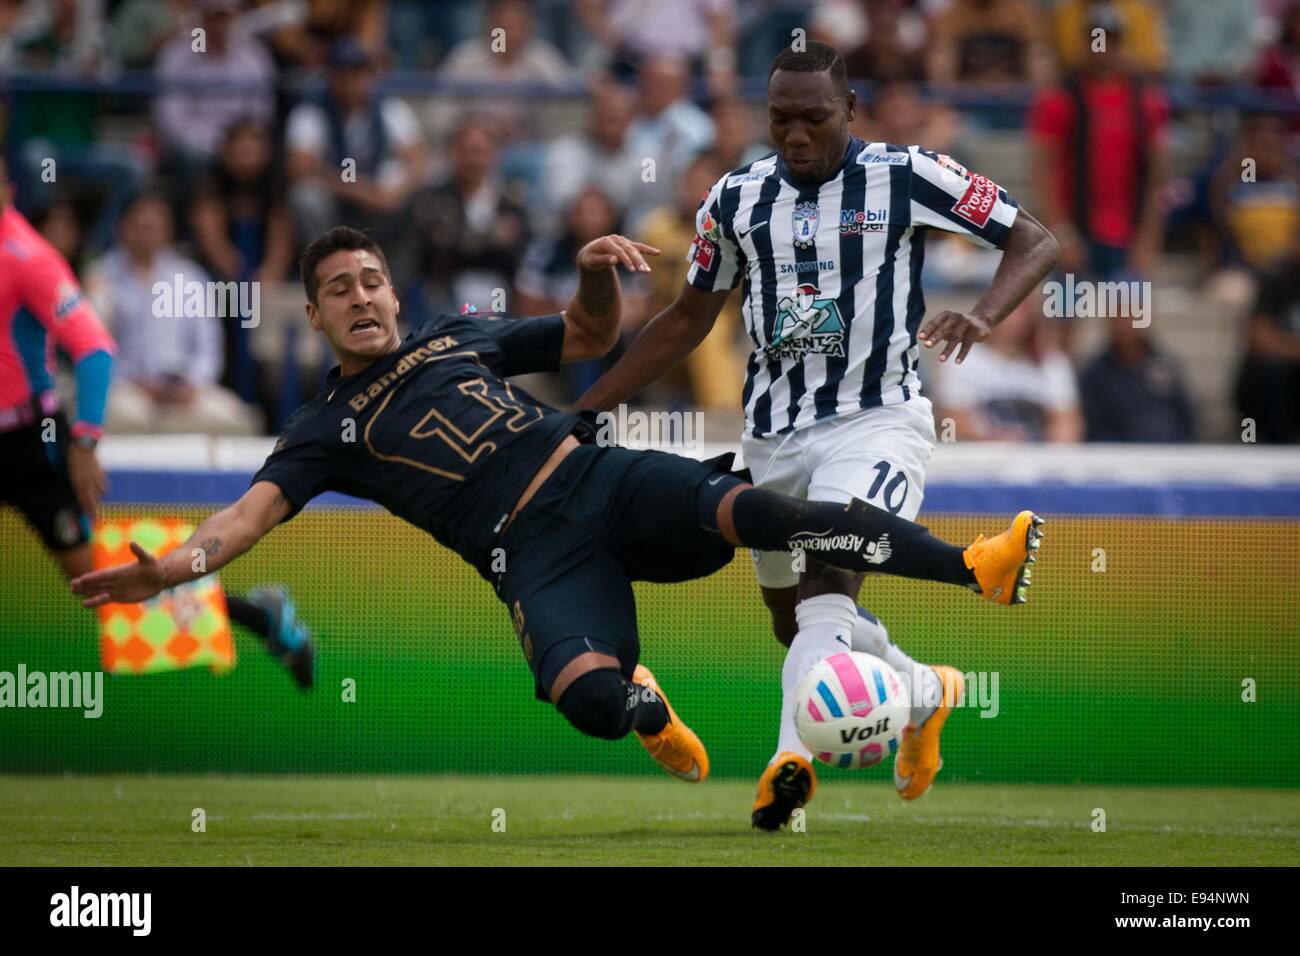 Mexico City, Mexico. 19th Oct, 2014. Ismael Sosa (L) of UNAM's Pumas vies for the ball with Walter Ayovi of Pachuca during the match of the MX League Opening Tournament 2014, held at University Olympic Stadium, in Mexico City, capital of Mexico, on Oct. 19, 2014. © Pedro Mera/Xinhua/Alamy Live News Stock Photo